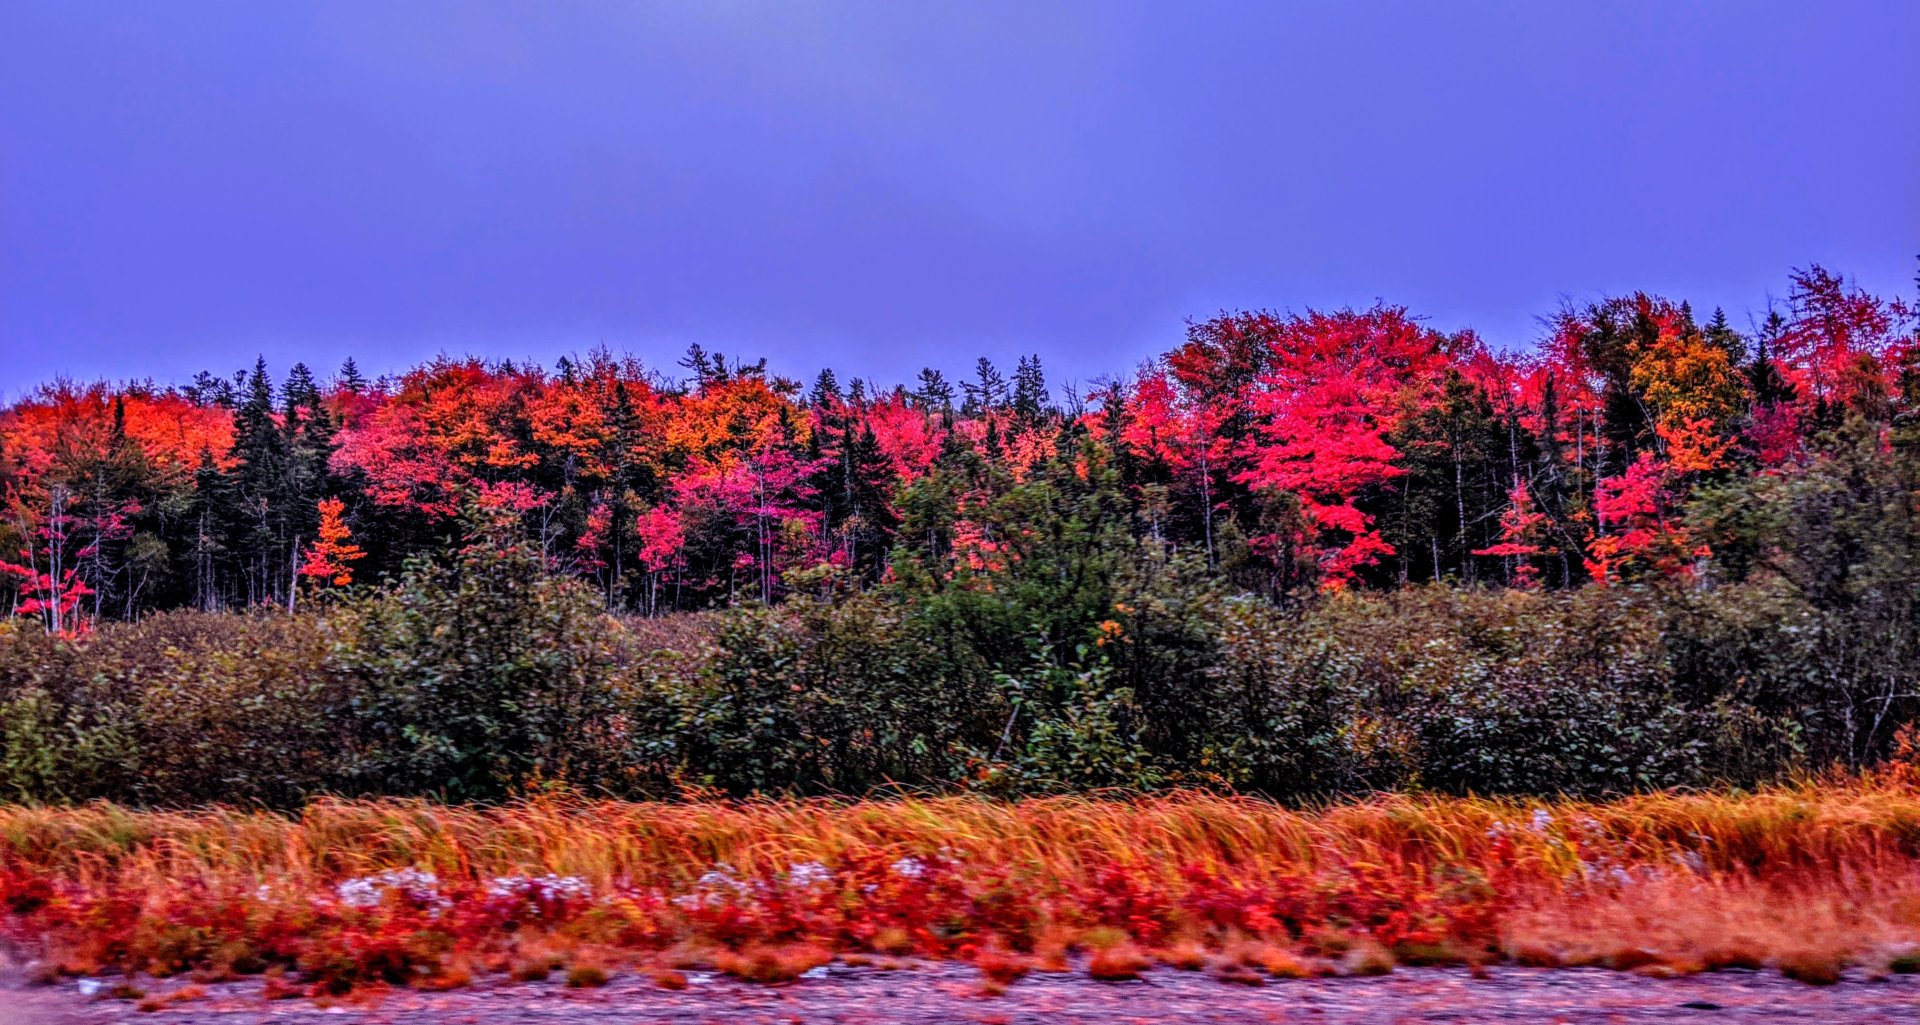 off Route 1 in Perry, Maine,  sep, 29 2020